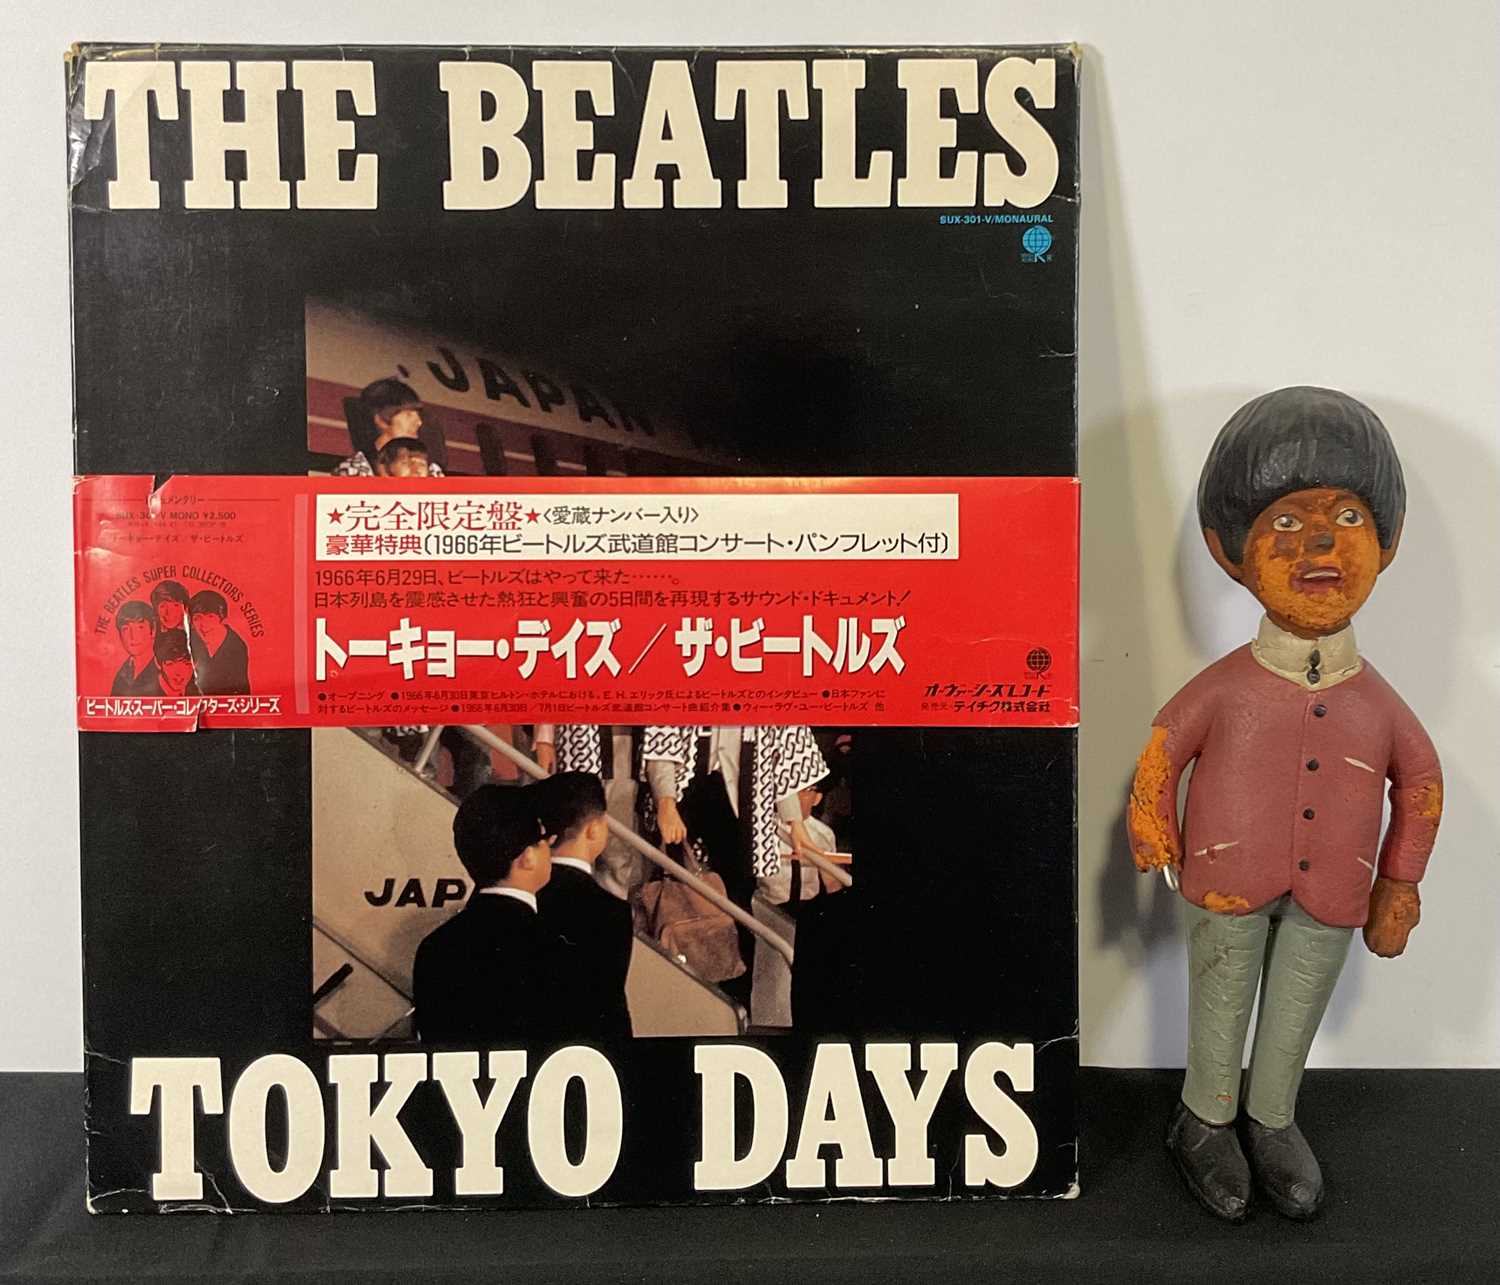 THE BEATLES - TOKYO DAYS Japanese Promotional LP with calendar (SUX-301-V together with a Paul